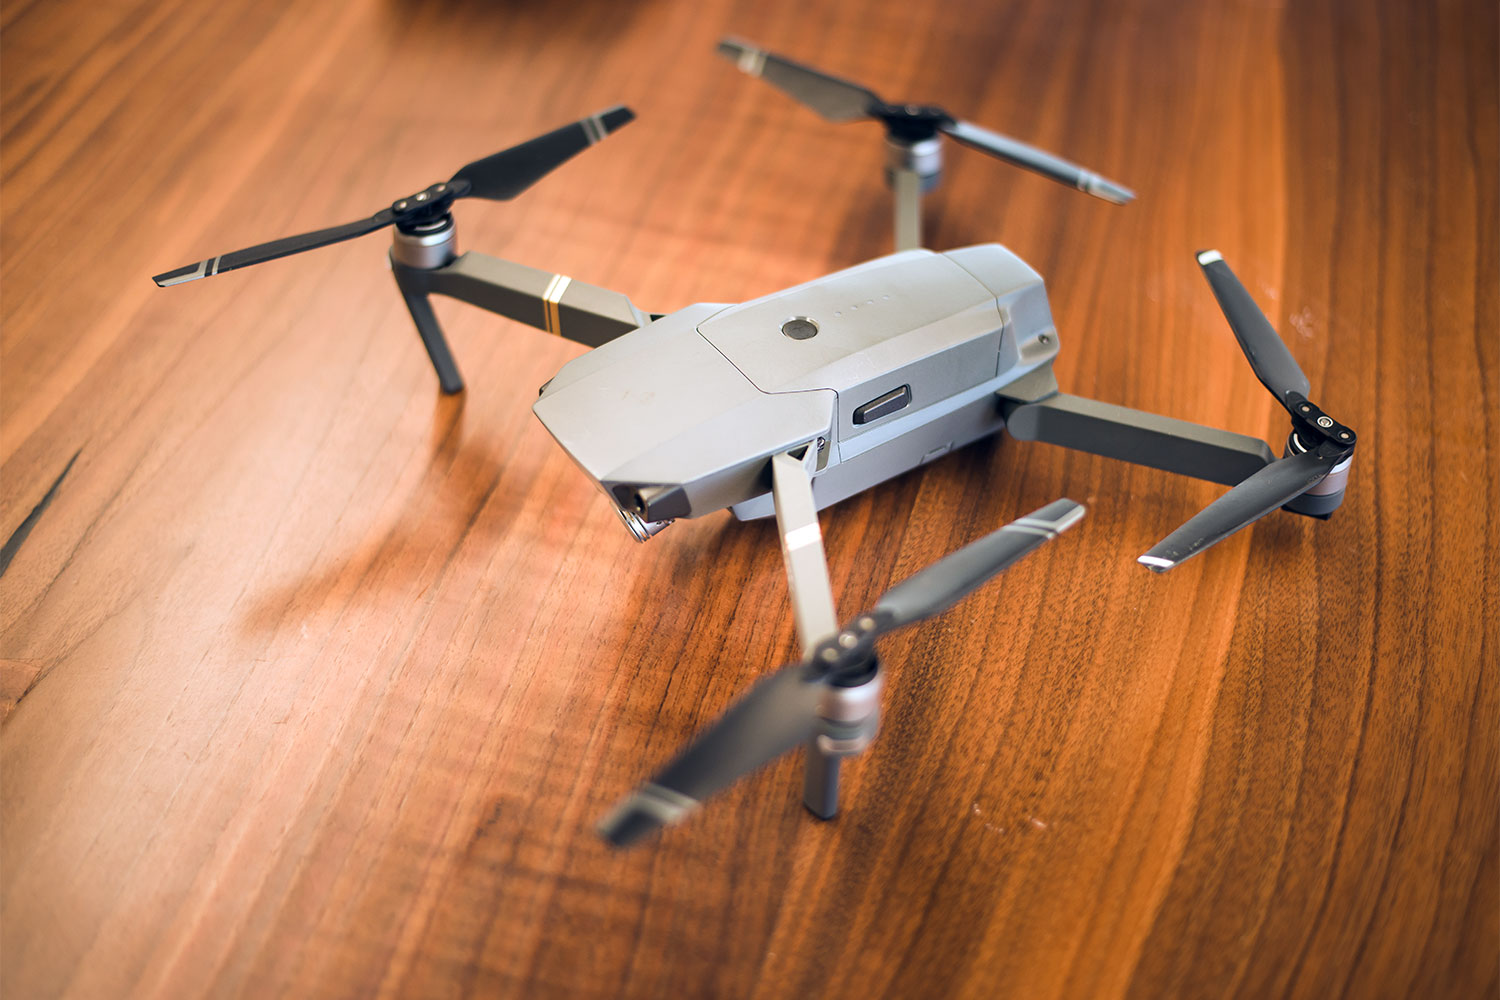 DJI's Mavic Pro Drone Has Just Dropped to Its Lowest-ever Price